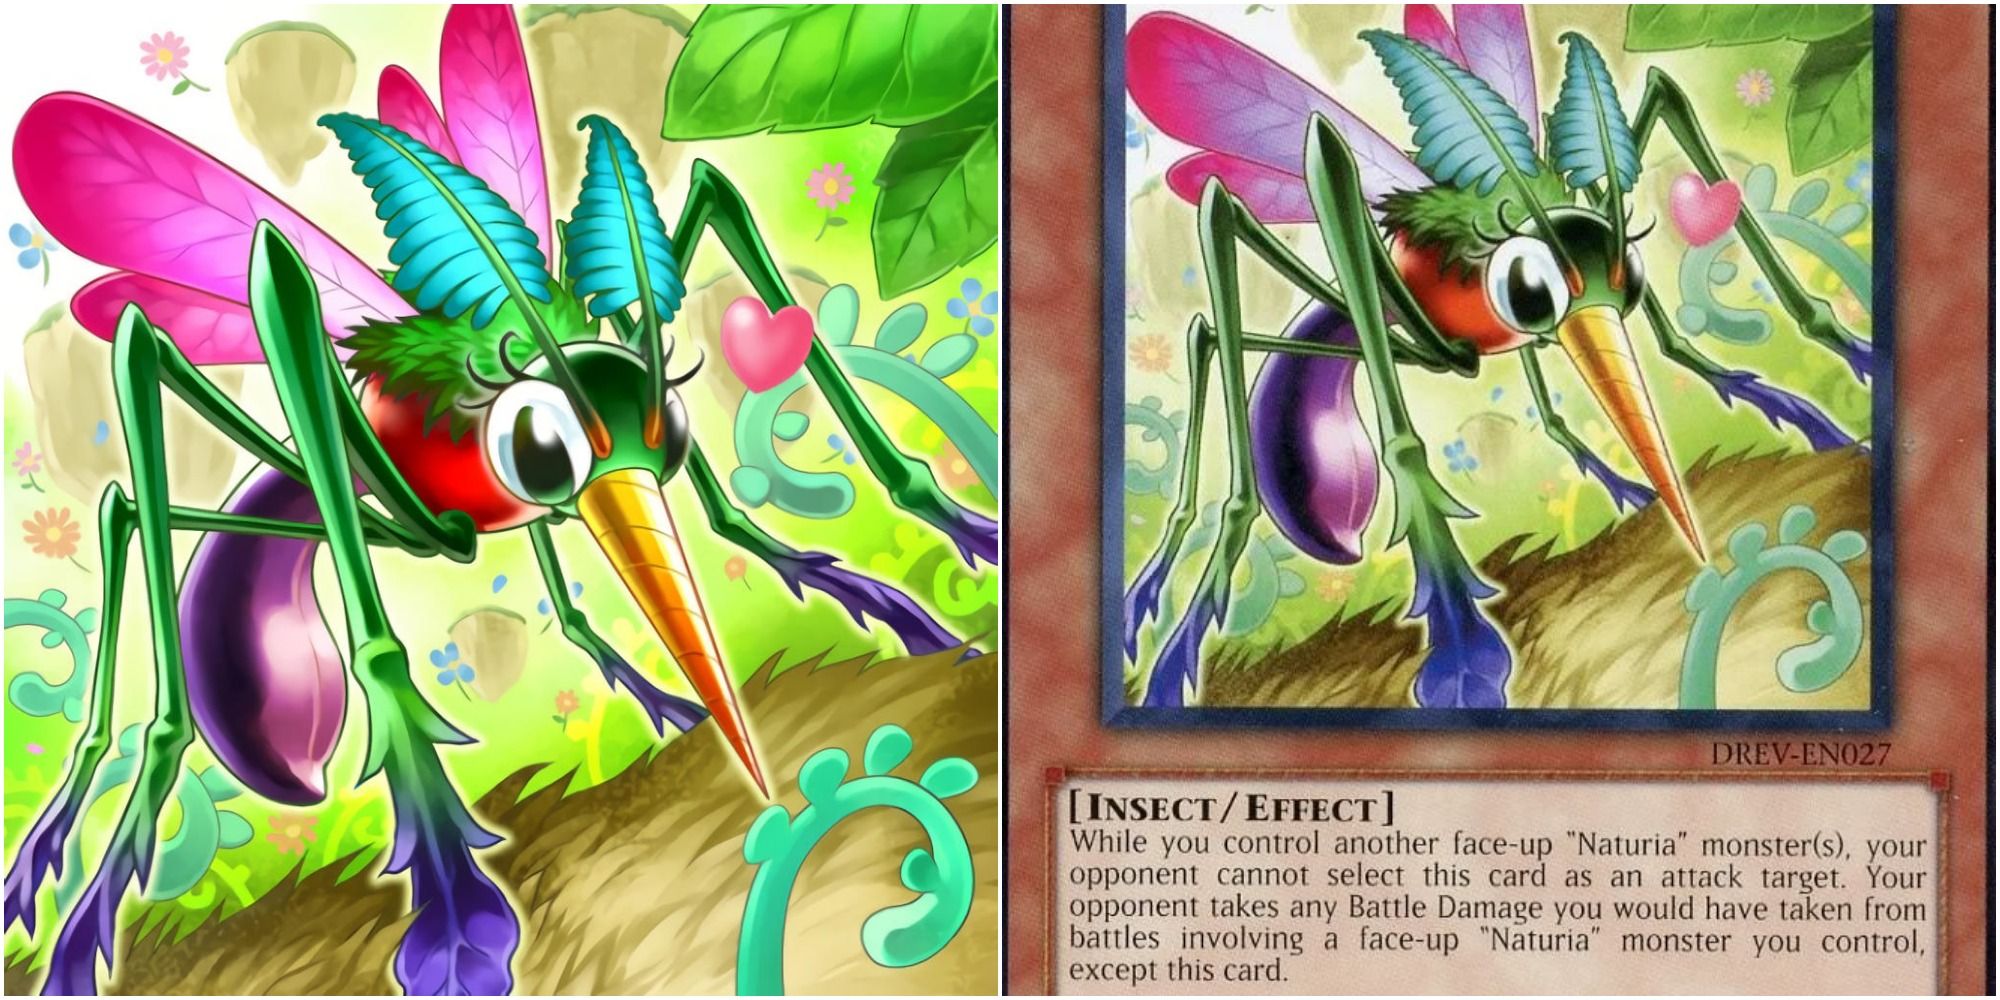 Naturia Mosquito card art and text